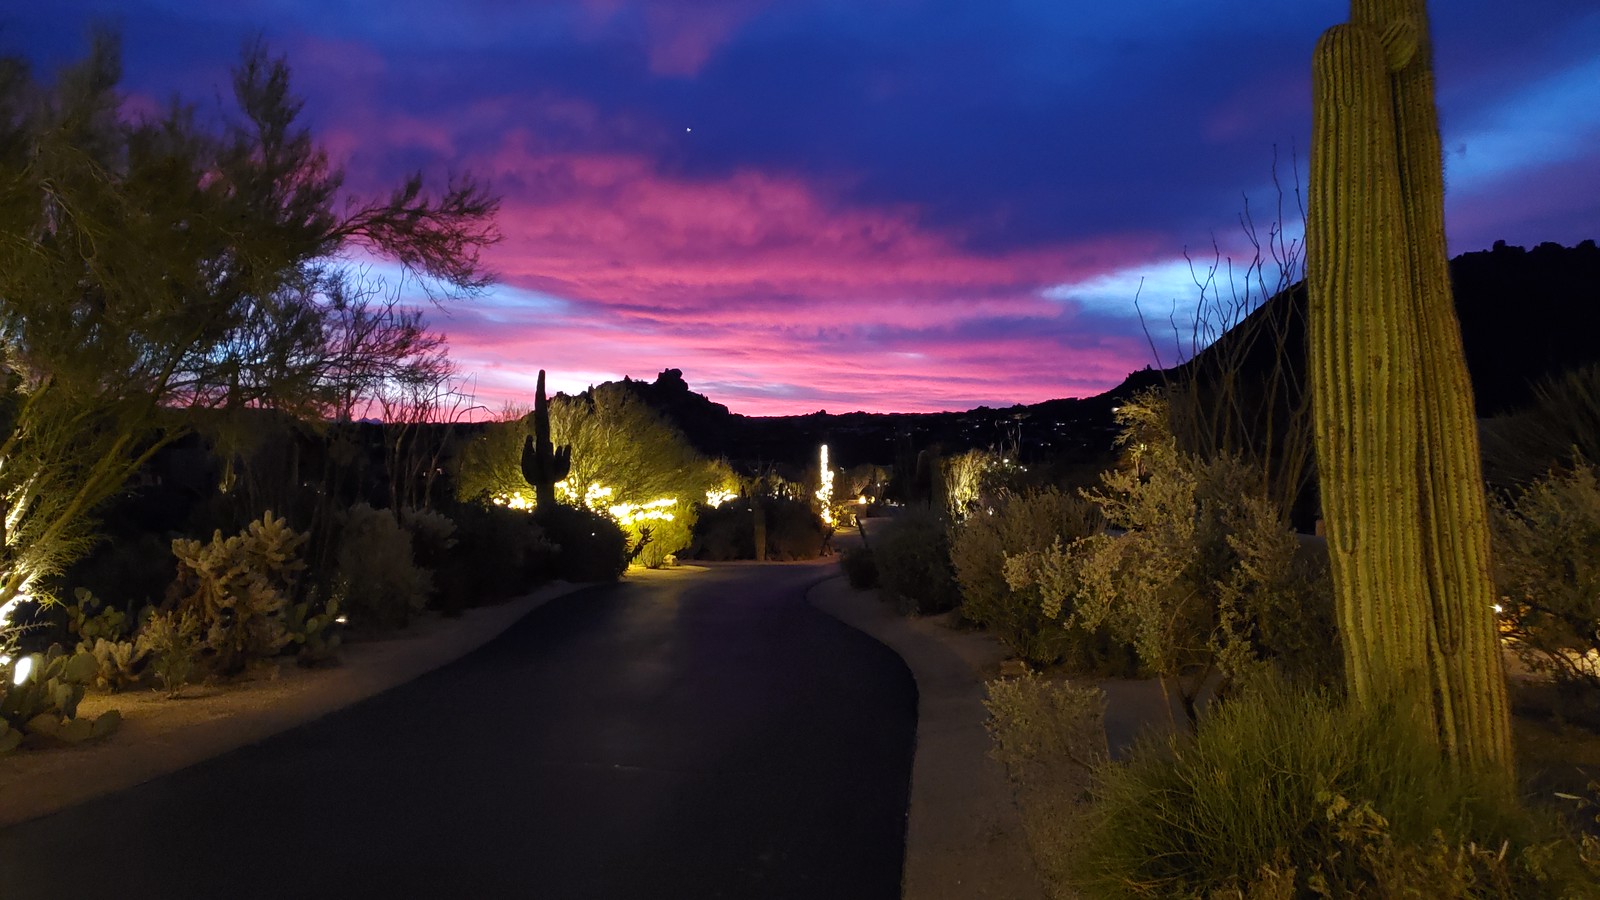 With one of Arizona's Easter egg-colored sunsets as the backdrop, bicycle lights reveal an amazing desert landscape during one of the special Phoenix mountain bike tours offered at dusk by the Wild Bunch Desert Guides.